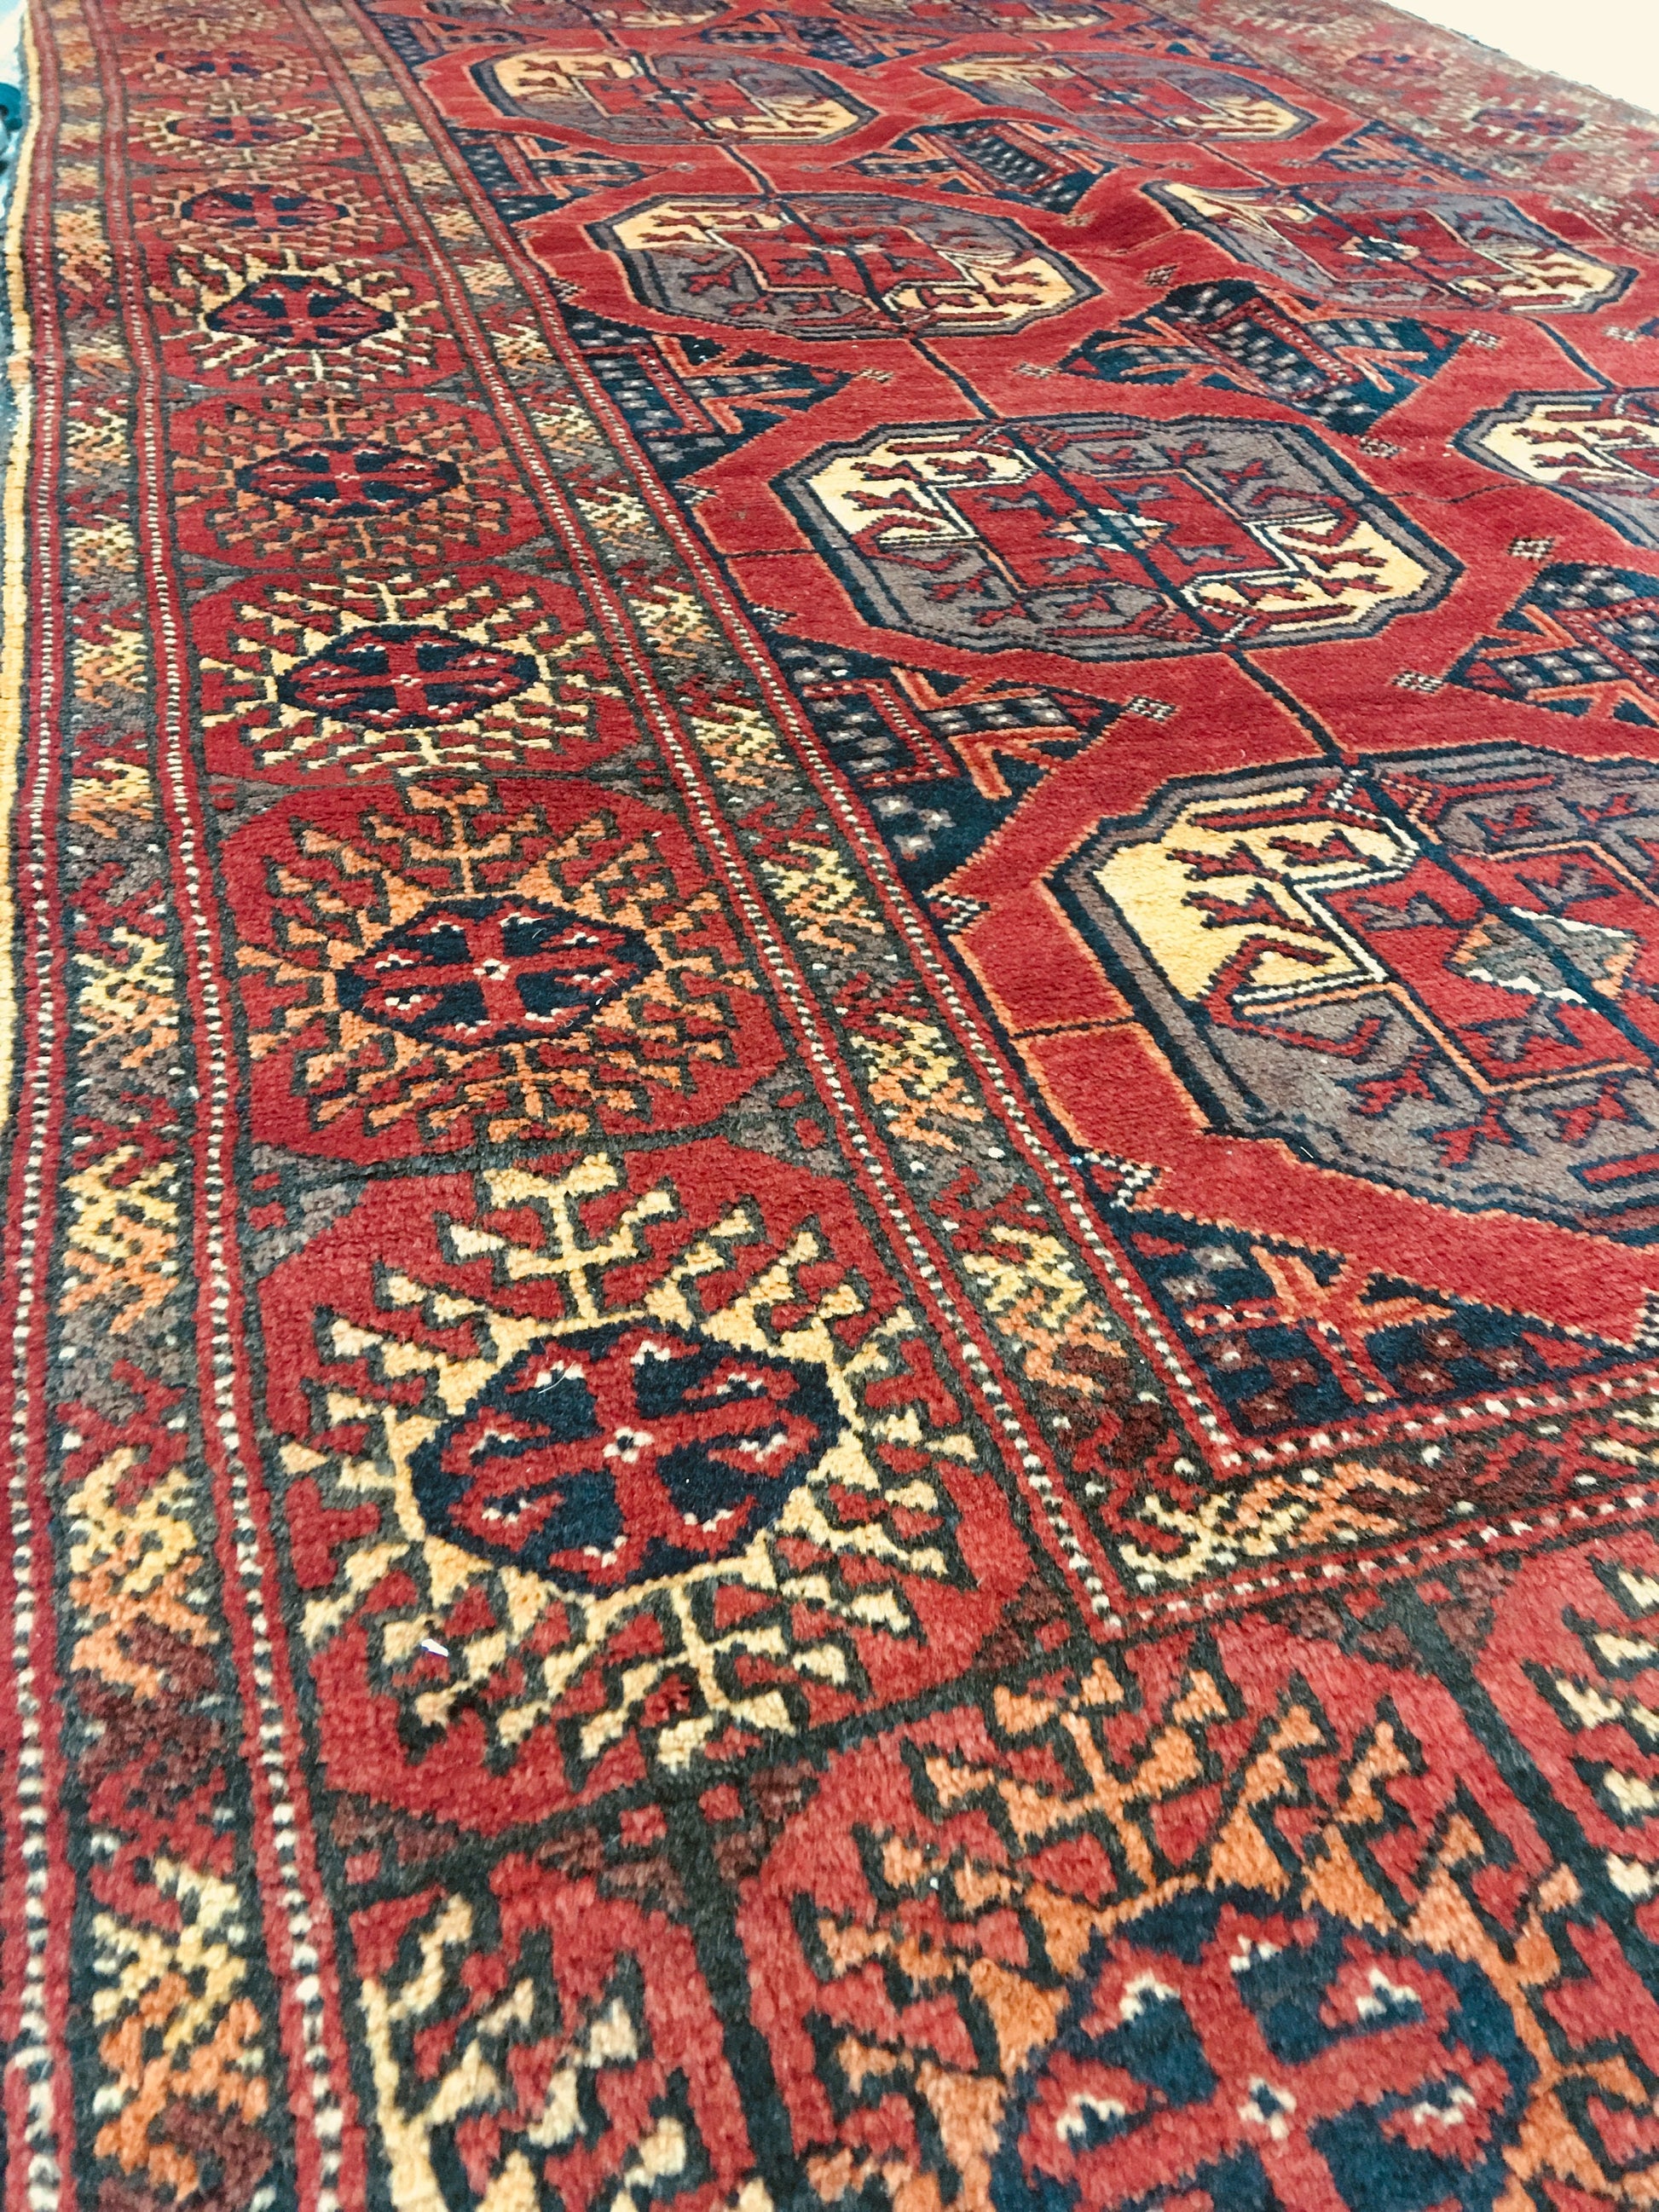 Antique Hand Knotted 4x6 Rug, Bright Red Navy Tribal Medallions, Low Pile Wool